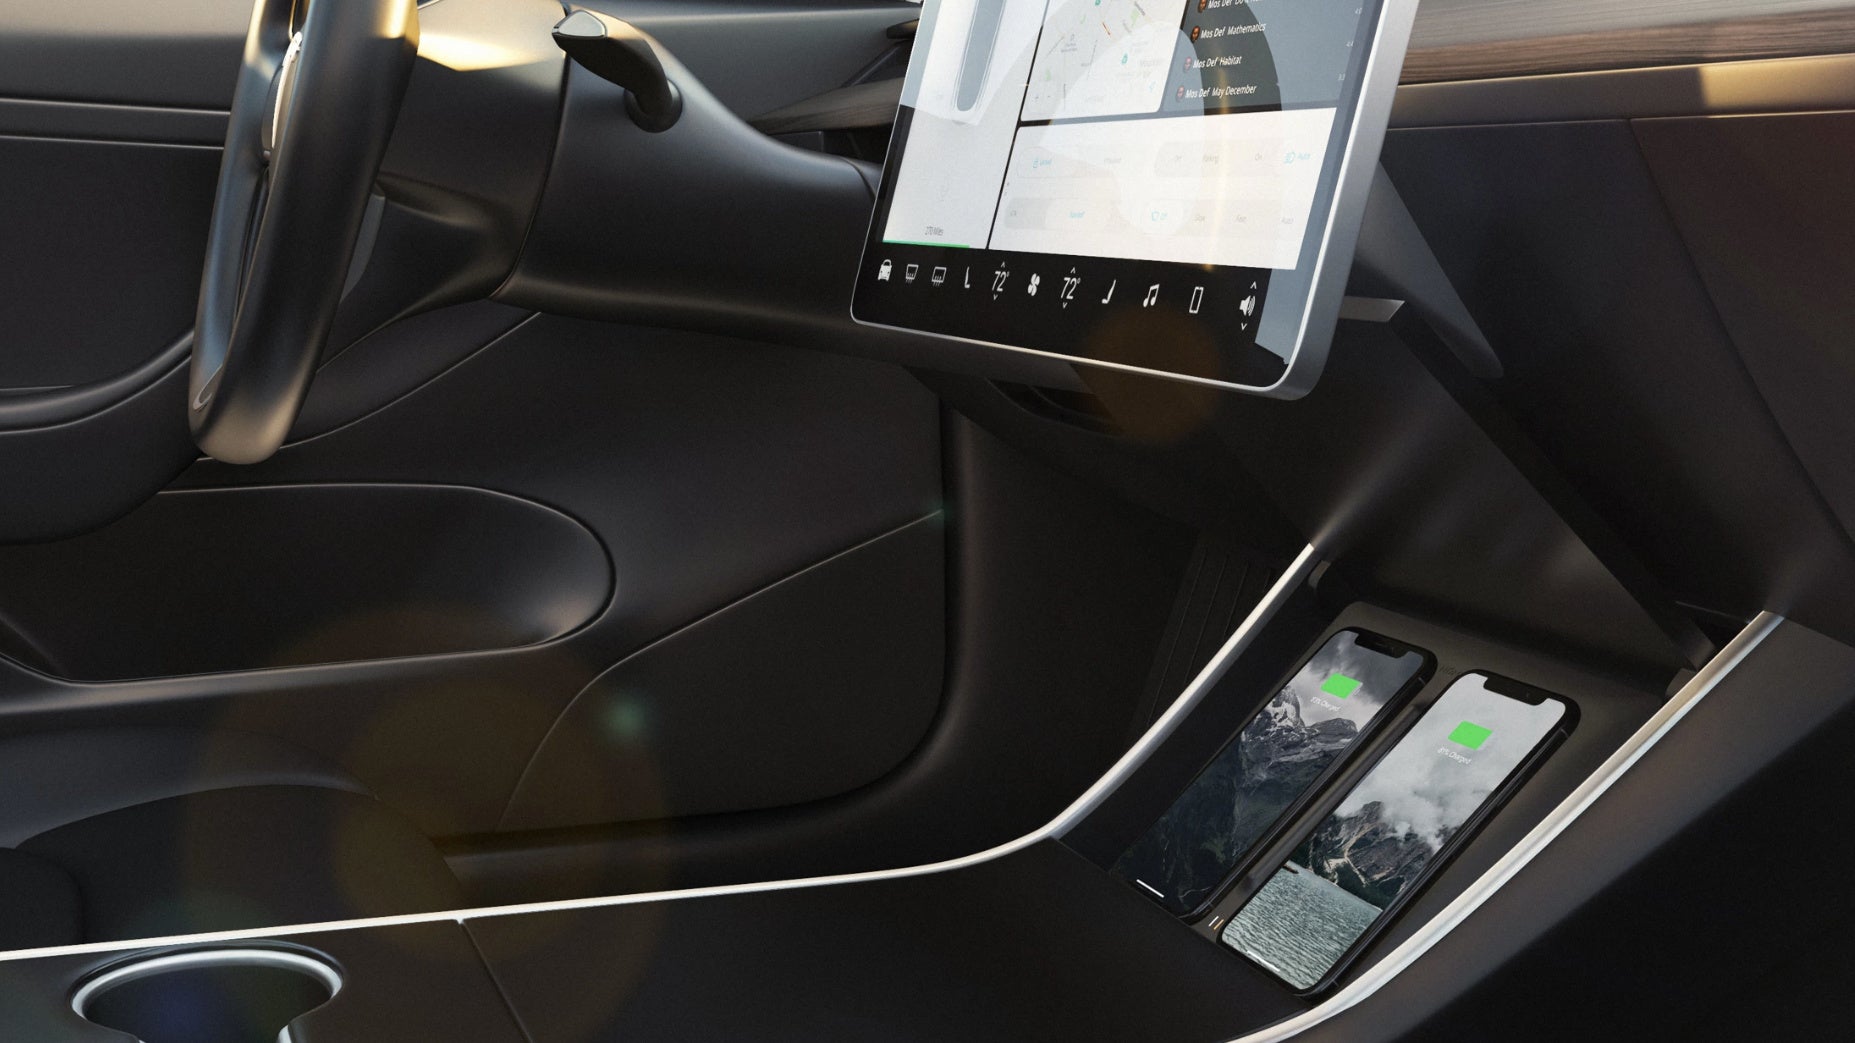 This new wireless charger is tailor-made for the Tesla Model 3